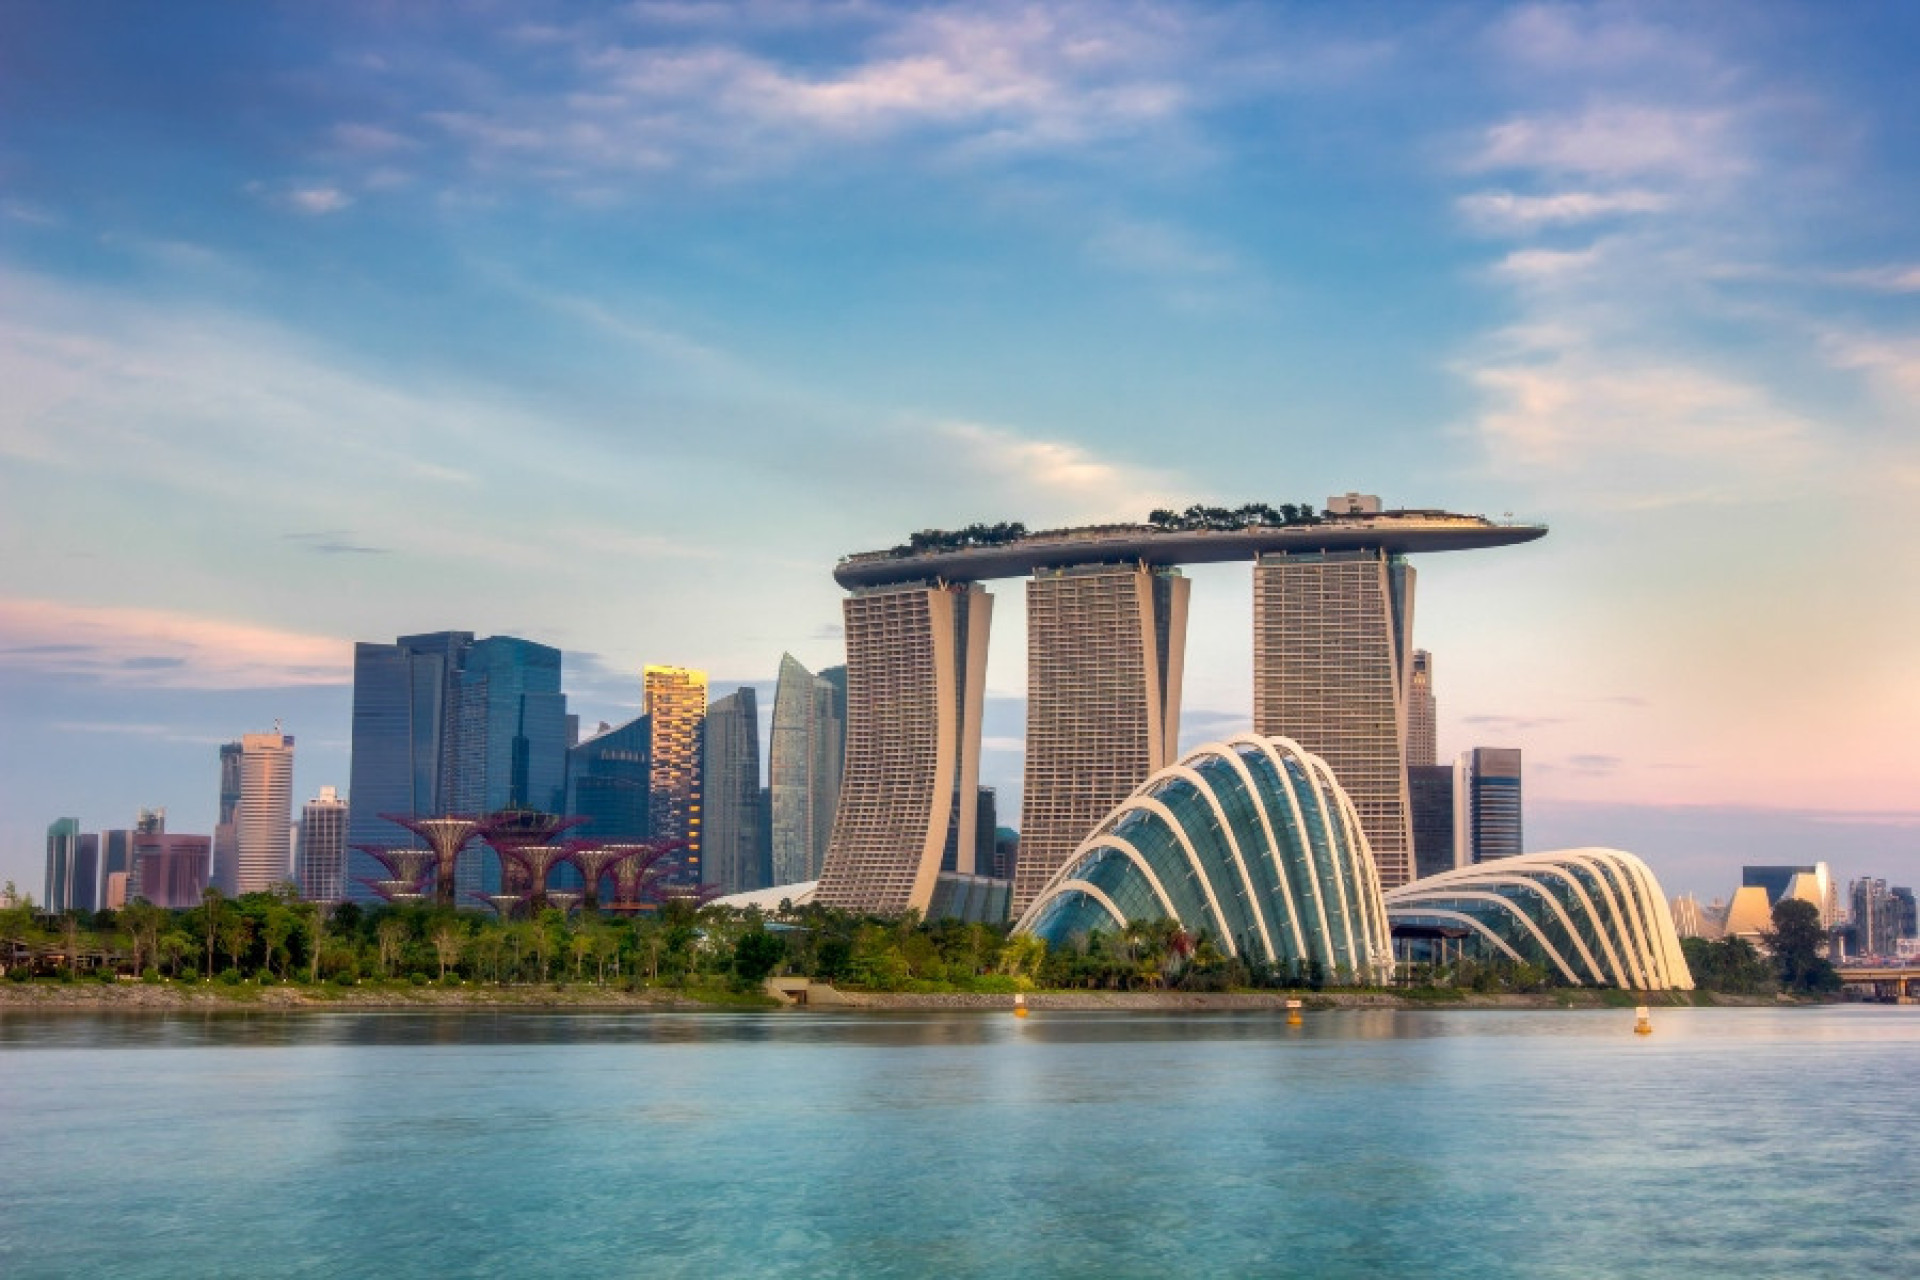 <p>A blend of exceptional healthcare services, a robust economy, and a clean environment have significantly contributed to the longevity of Singapore’s residents.</p><p>You may also like:<a href="https://www.starsinsider.com/n/492041?utm_source=msn.com&utm_medium=display&utm_campaign=referral_description&utm_content=582401en-en"> Discover Satan's equivalents in religions around the world</a></p>